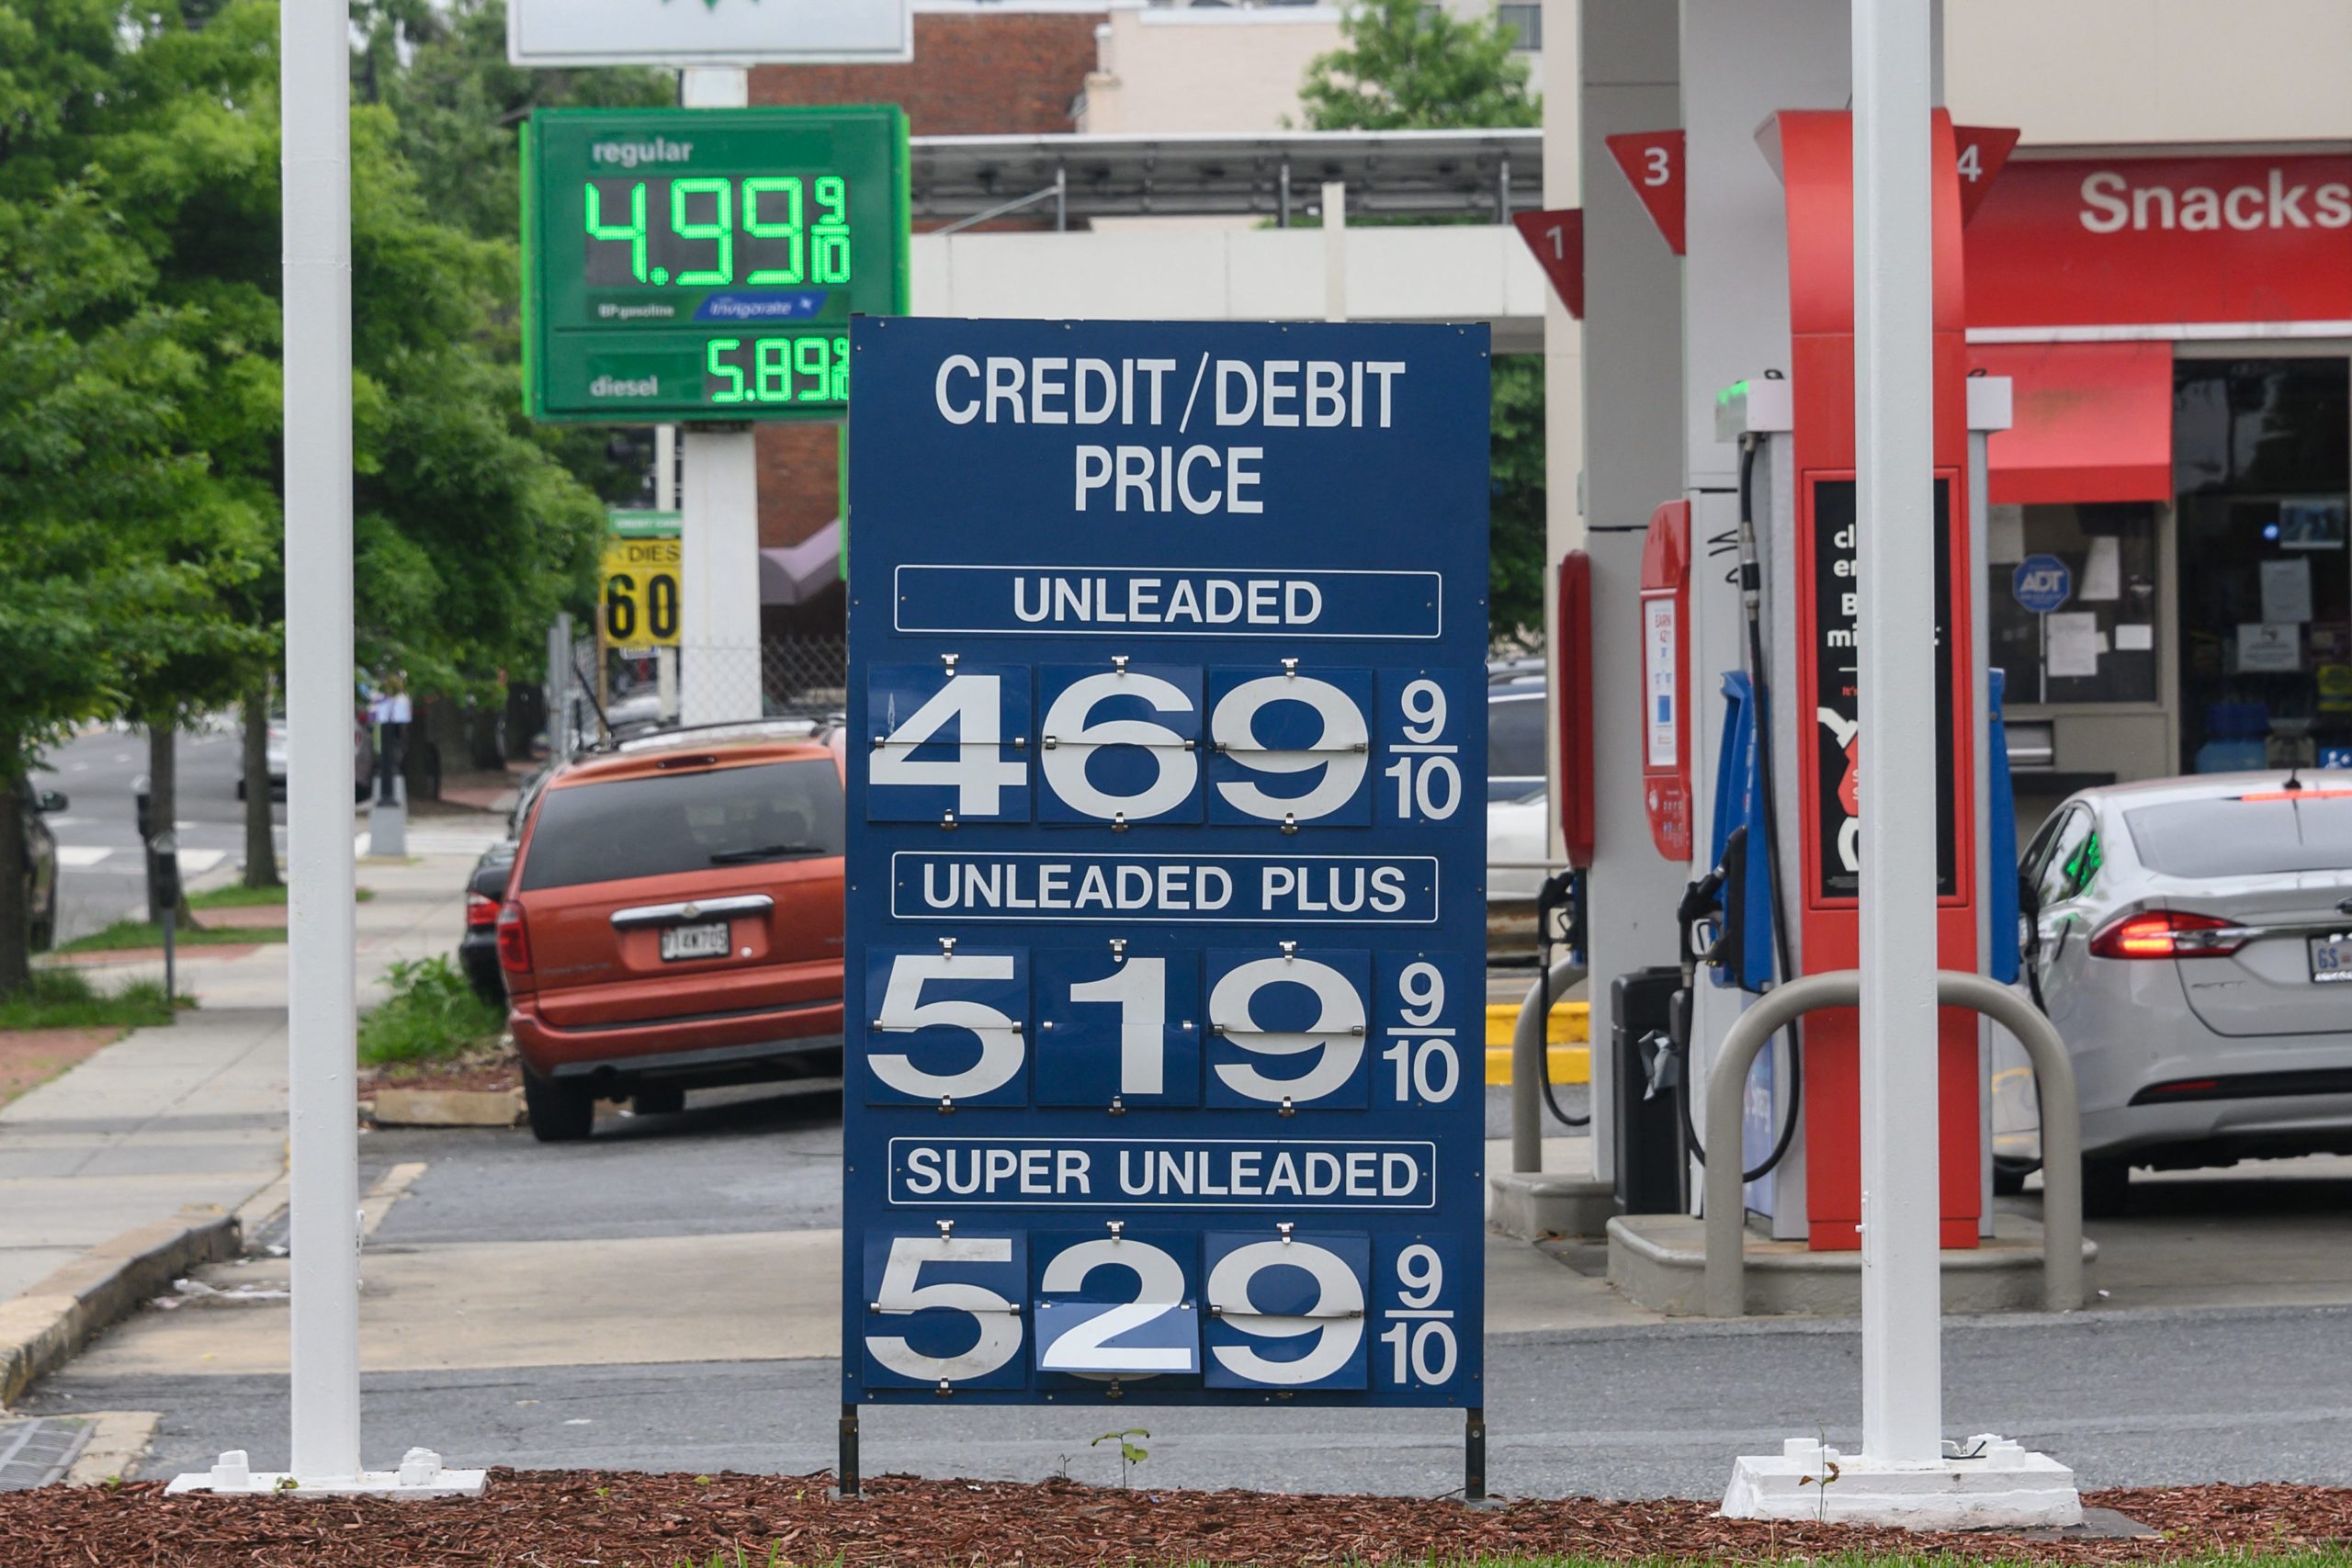 Gasoline prices are posted at a gas station in Washington, D.C., on Thursday. (Nicholas Kamm/AFP via Getty Images)